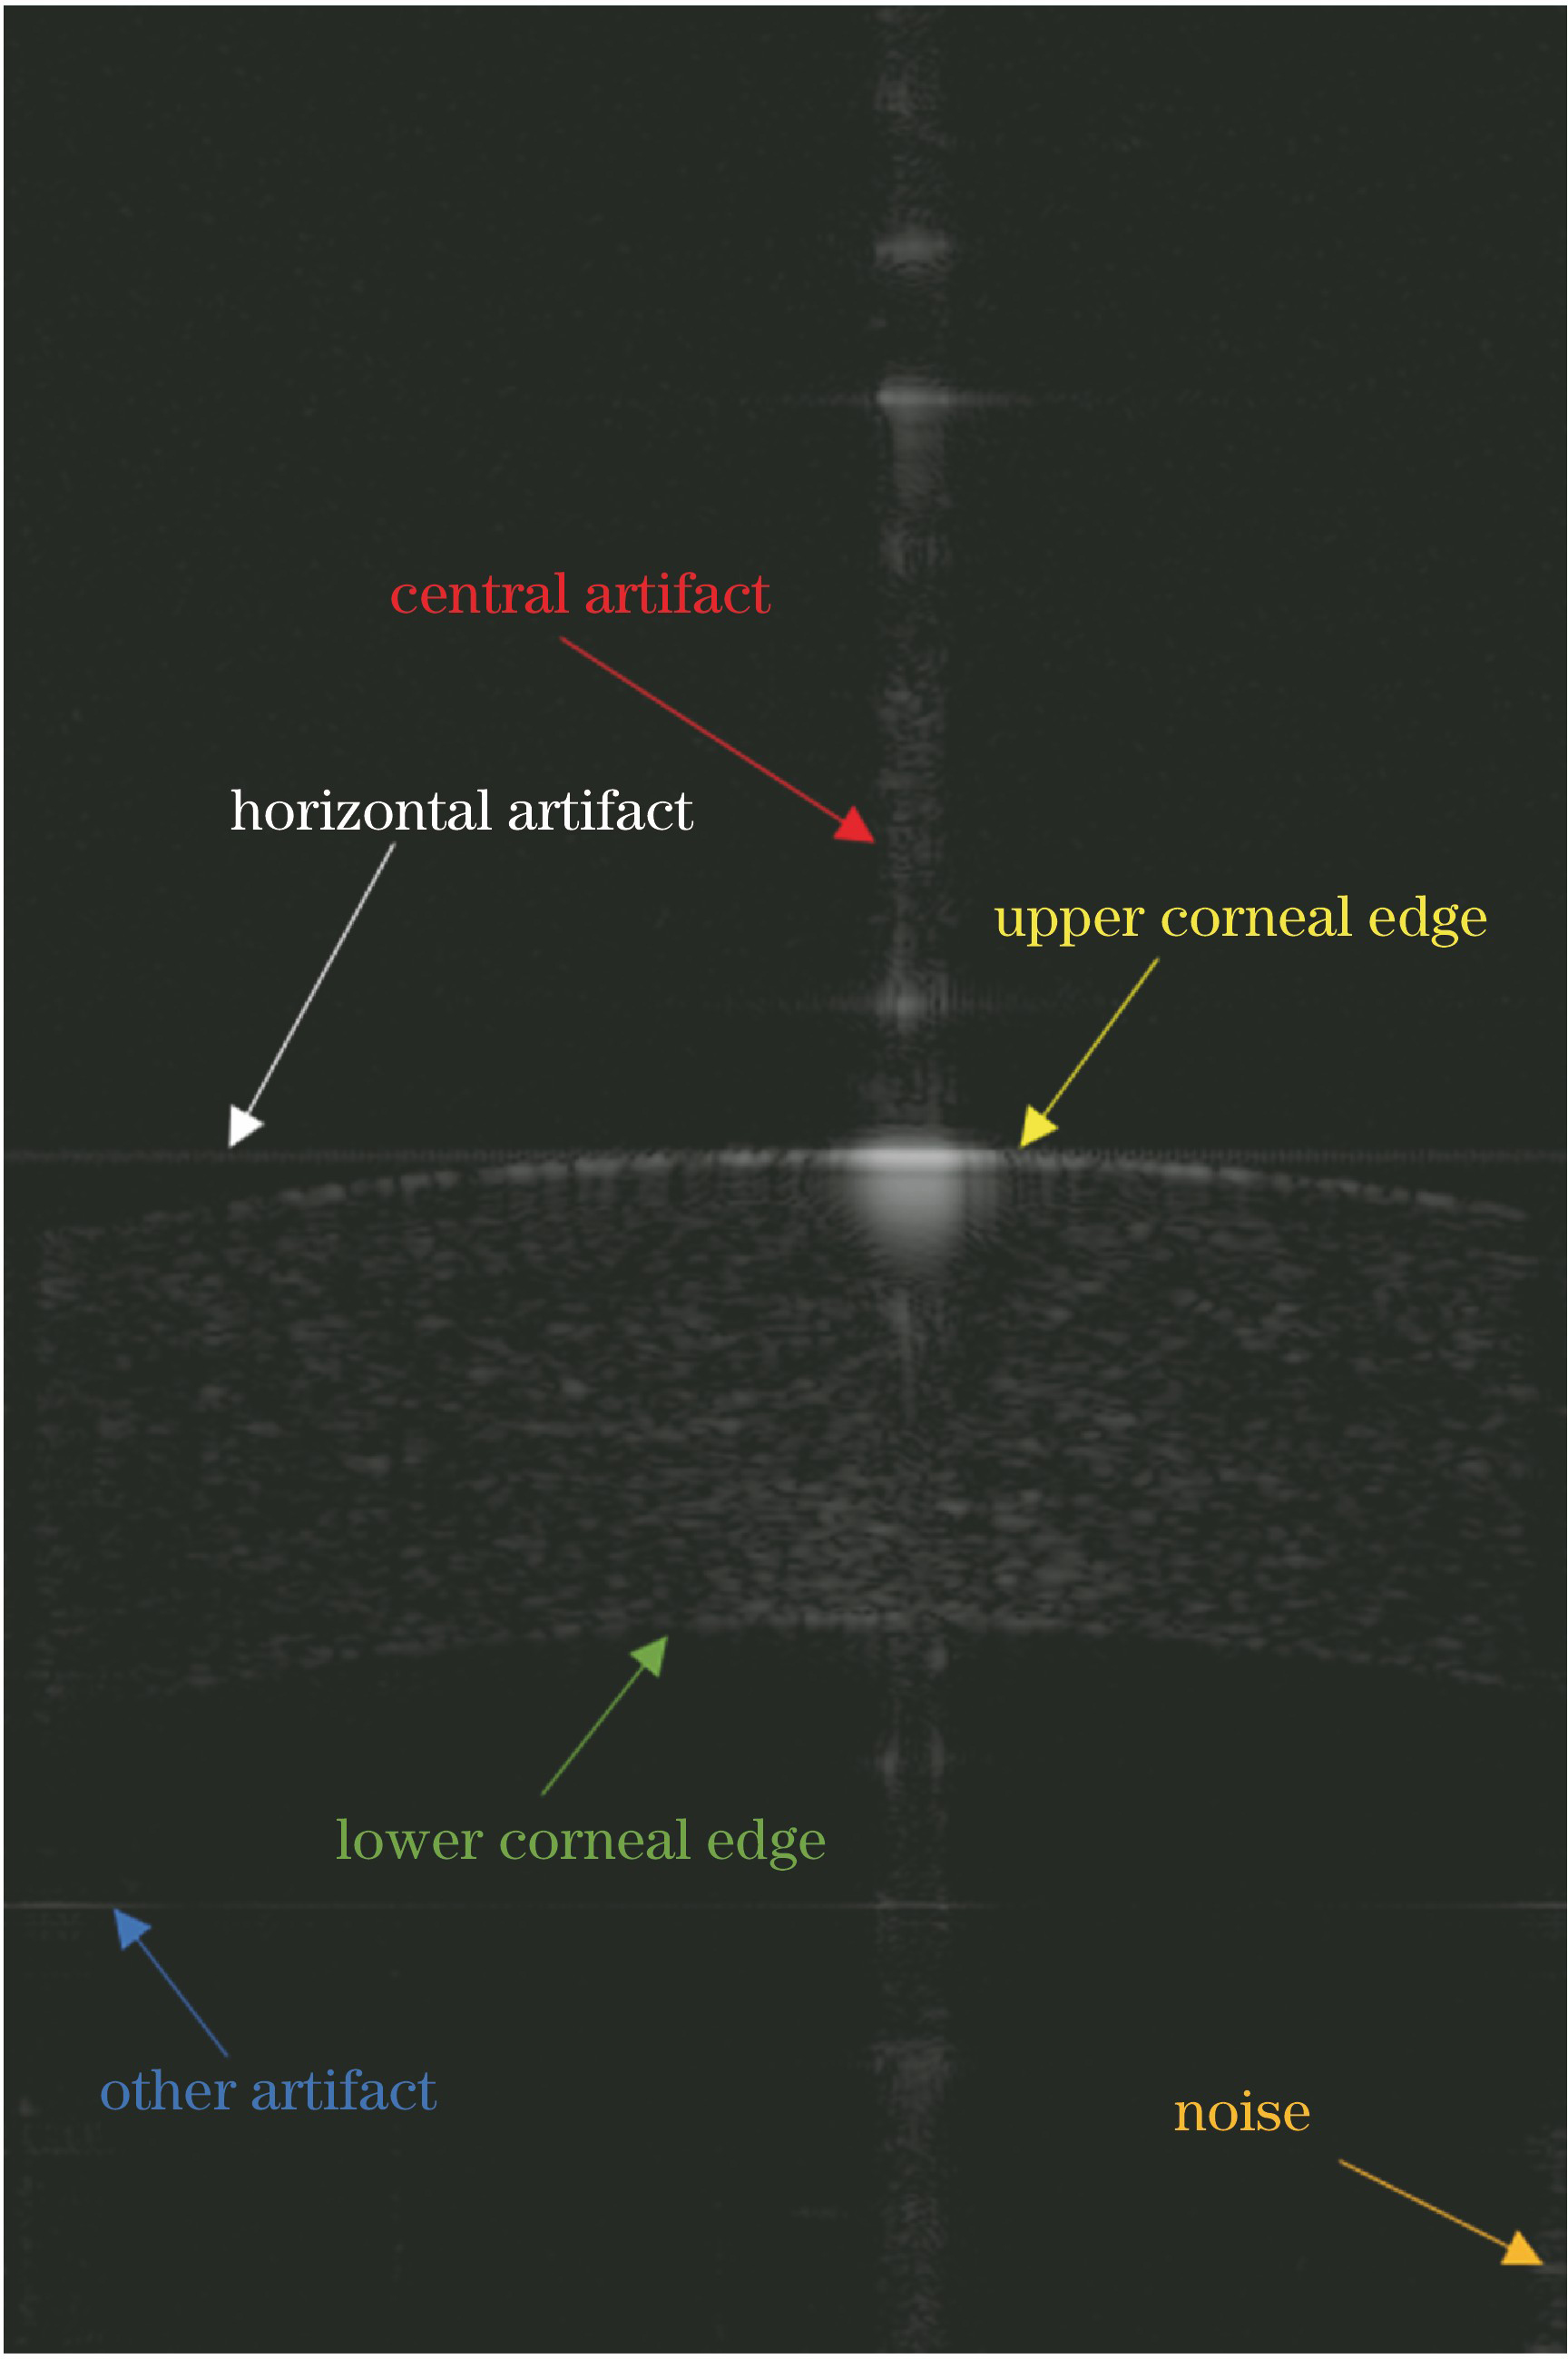 Noise and artifacts in original cornea B scan image